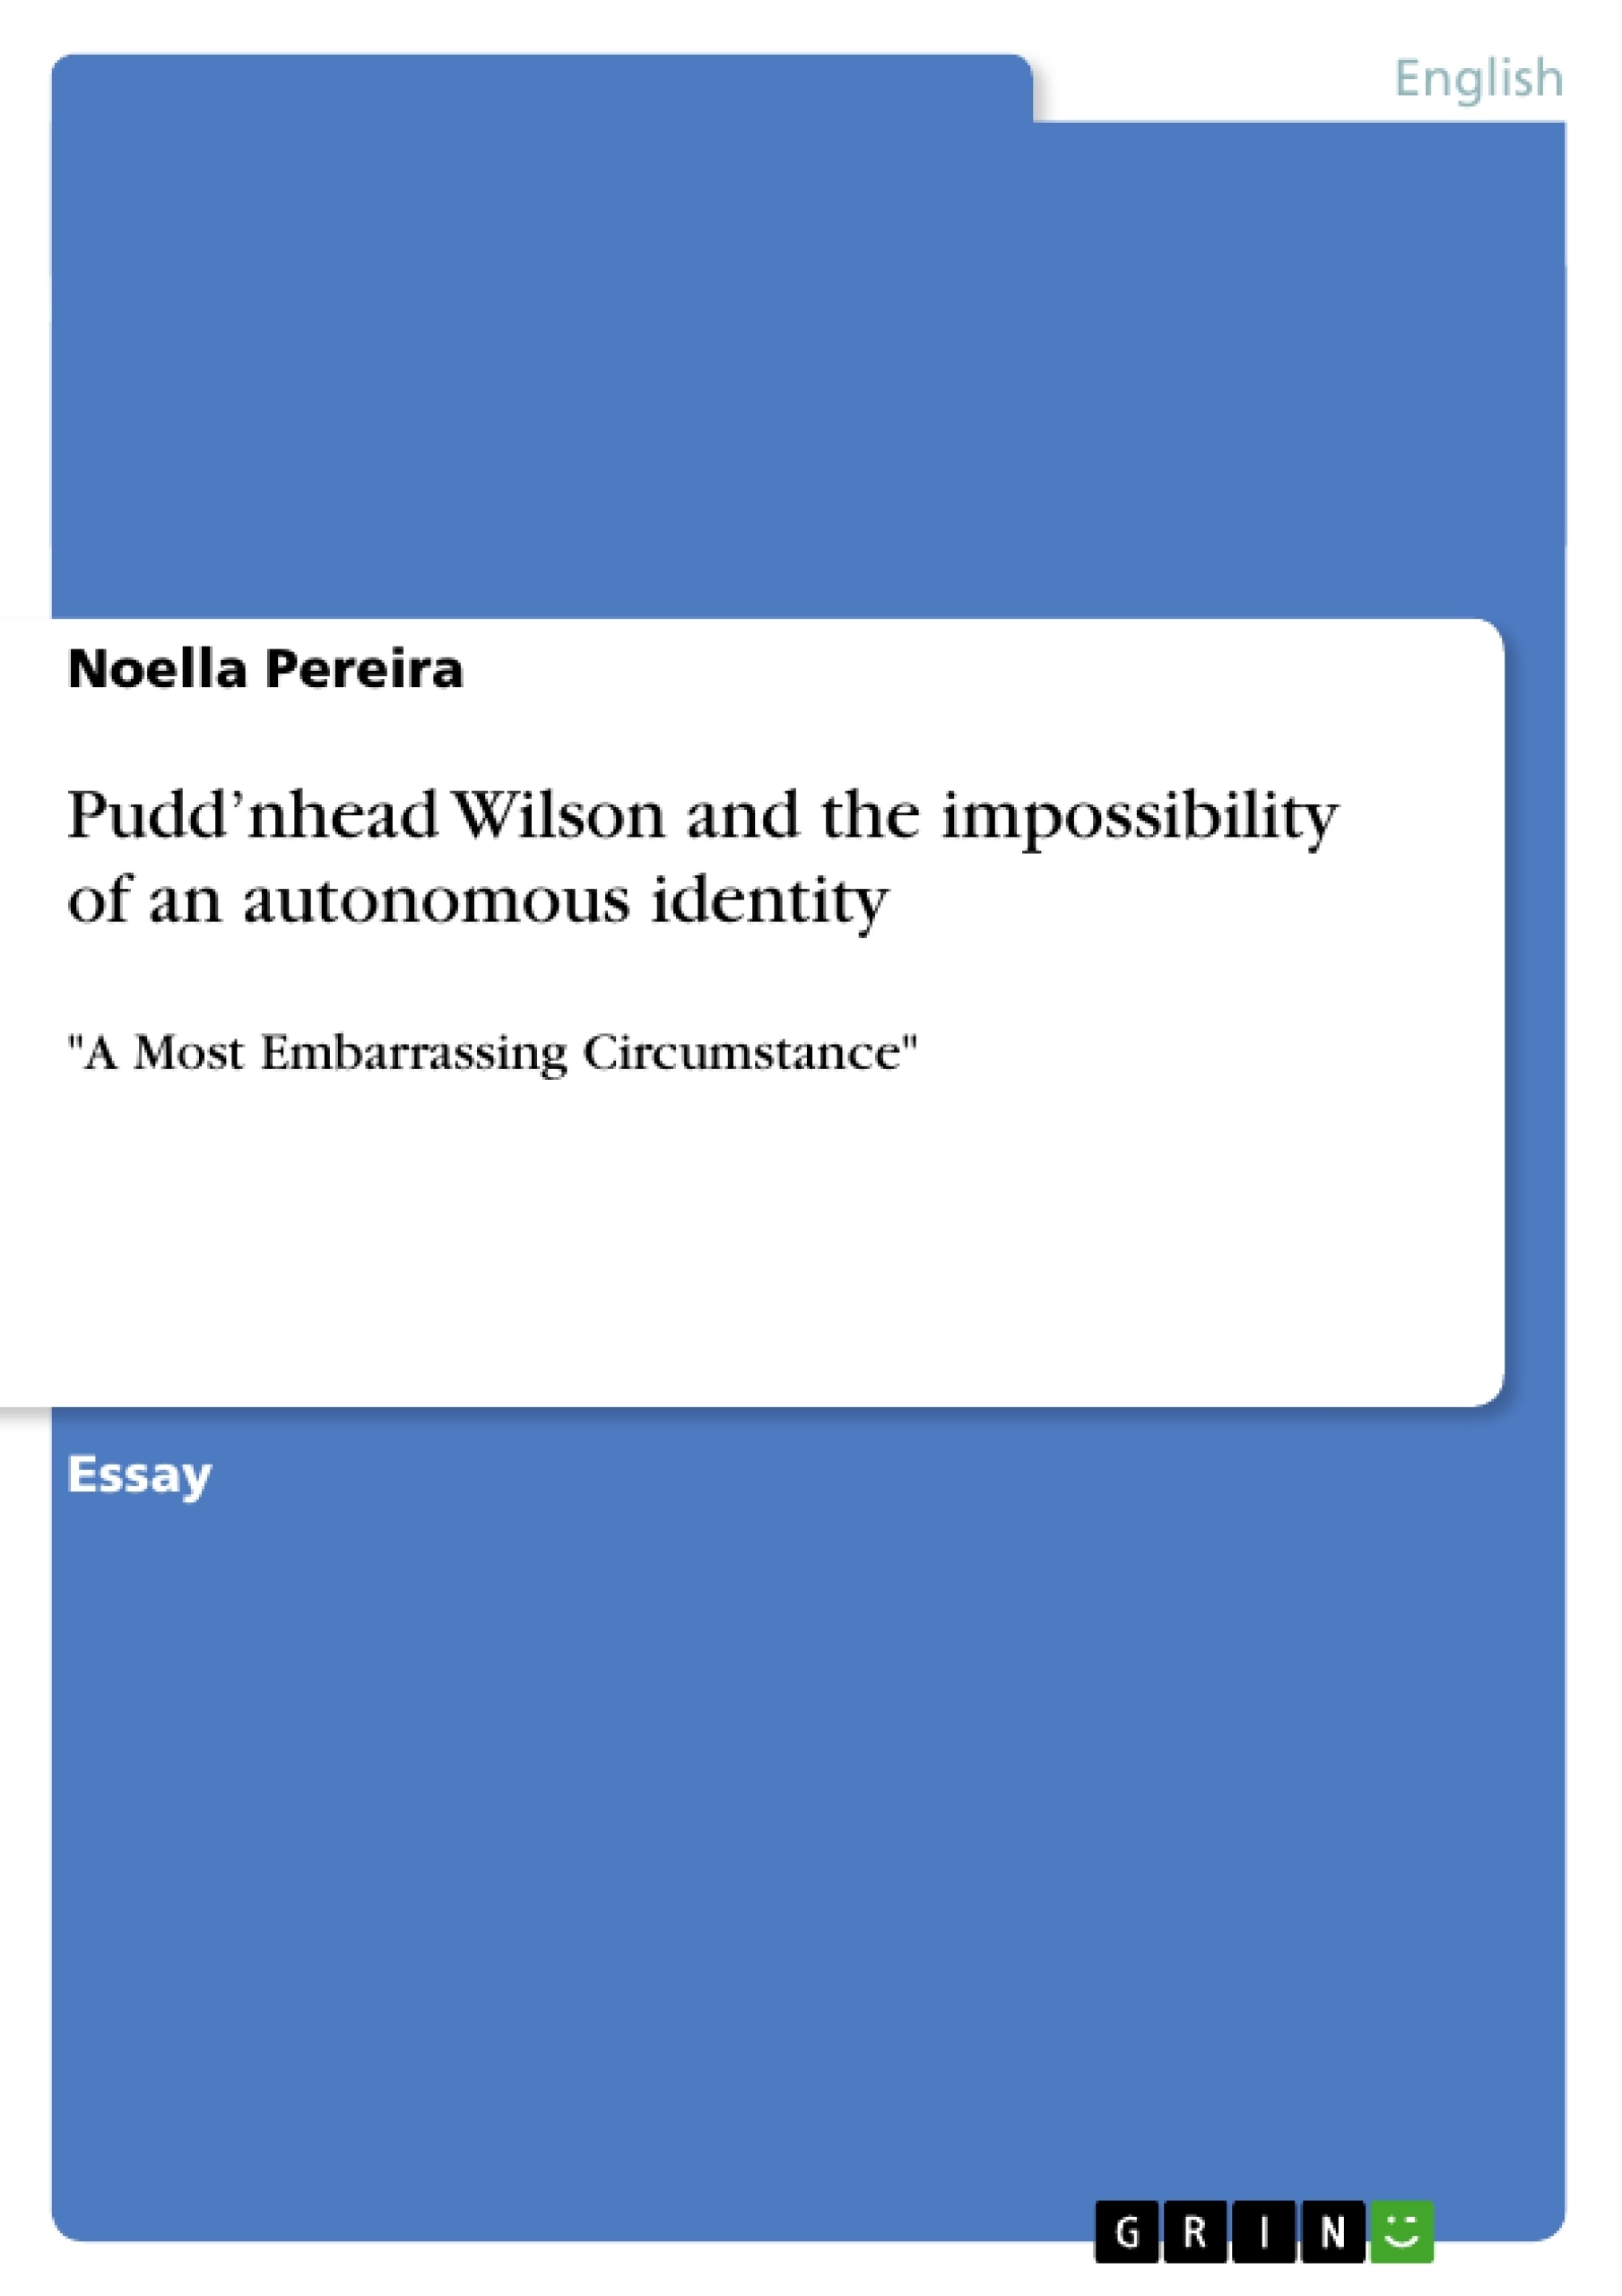 Titre: Pudd’nhead Wilson and the impossibility of an autonomous identity